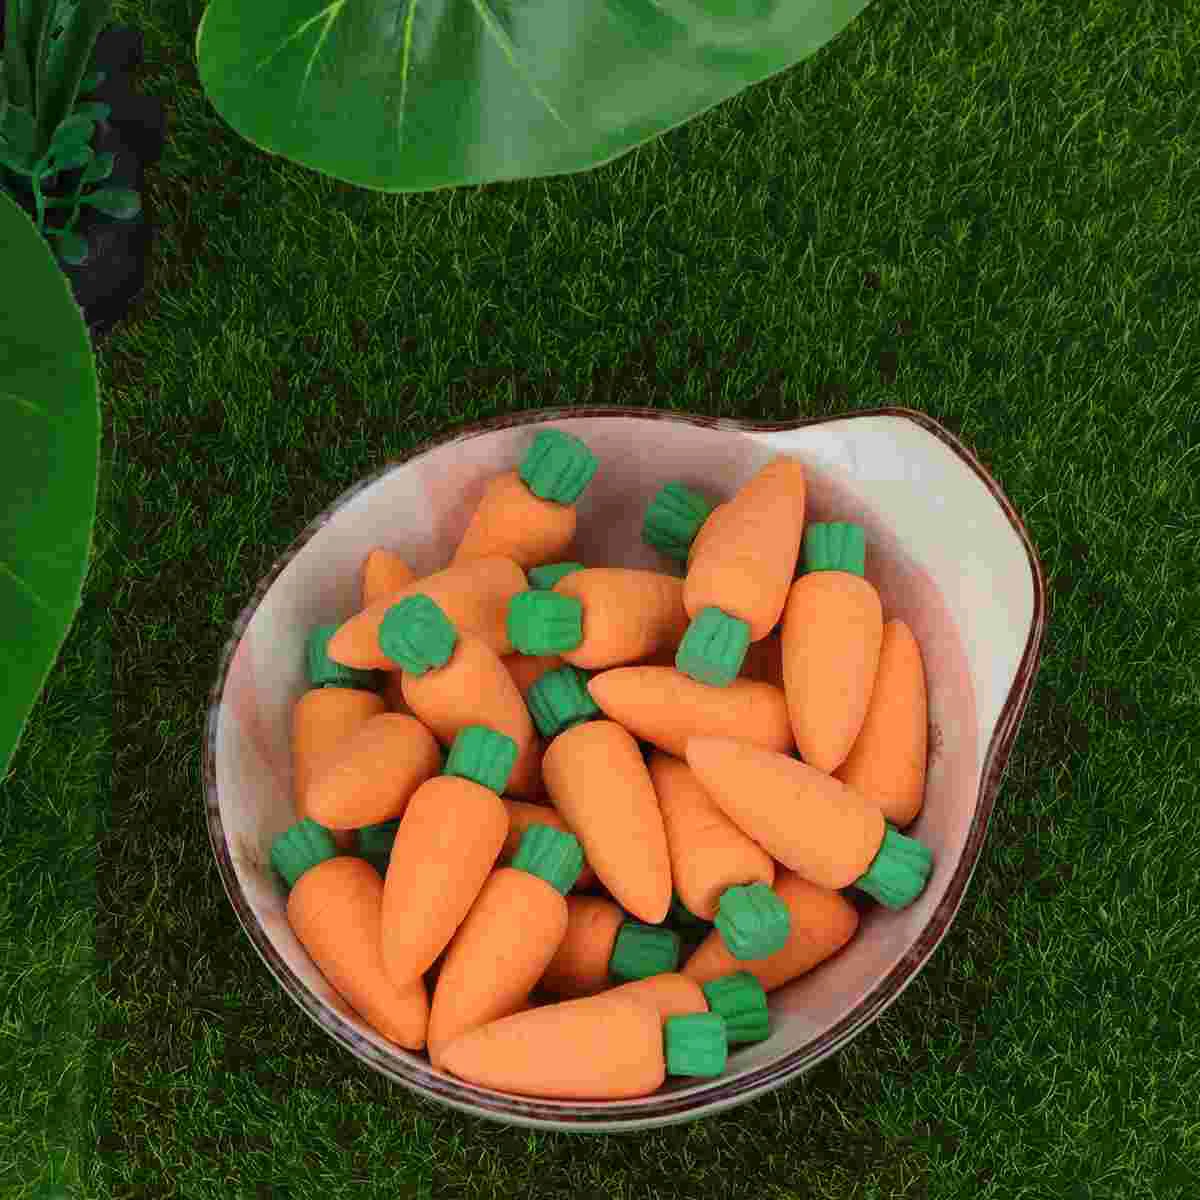 

30pcs Carrot Erasers Rubber Eraser Novelty Easters Party Favors Gifts for Kids